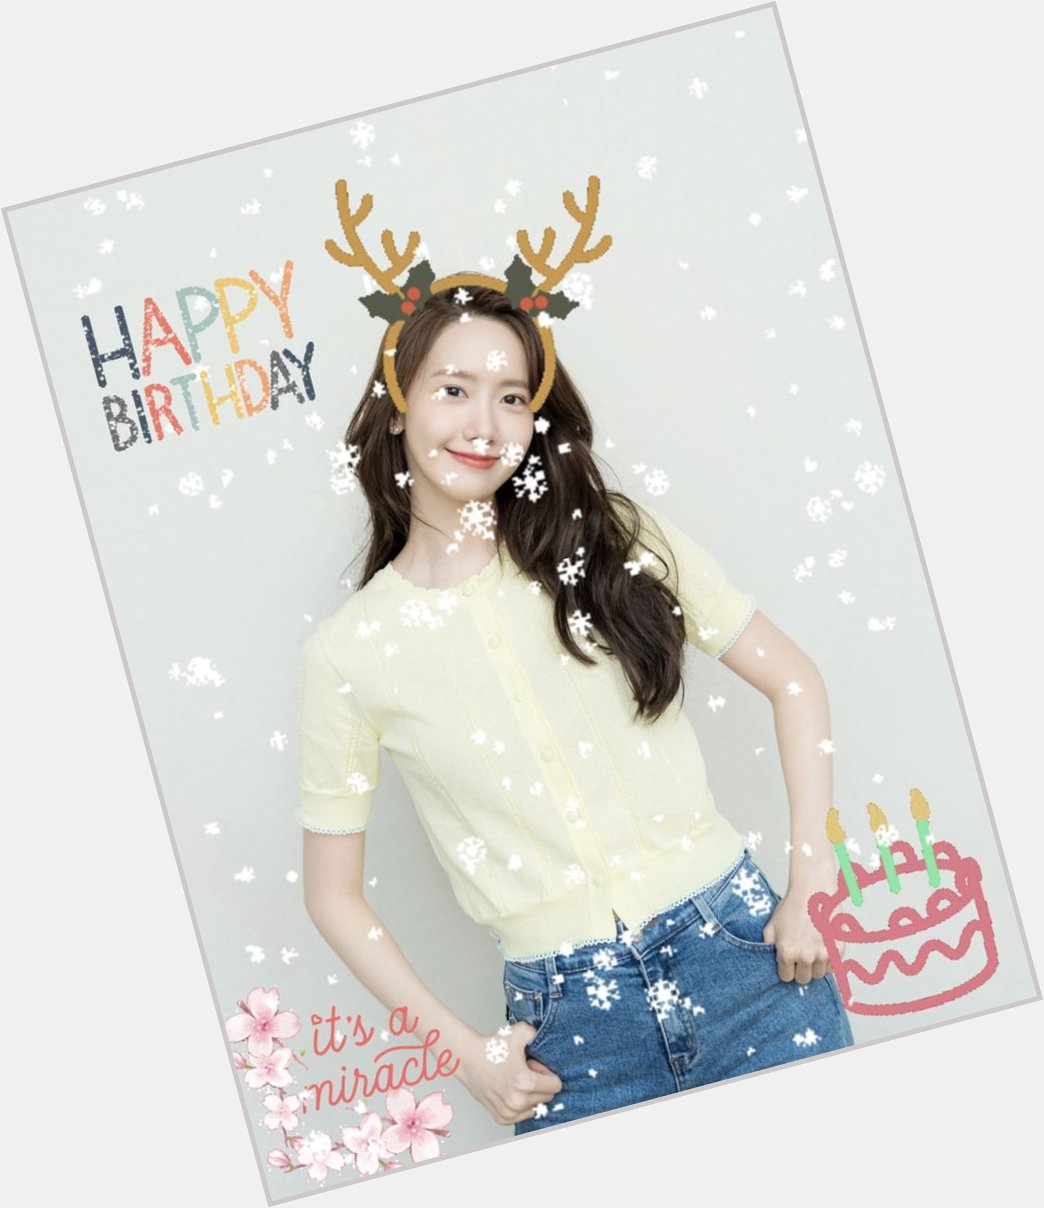  Having you in this world, It s a Miracle.

Happy Birthday Our Miracle, Im Yoona  